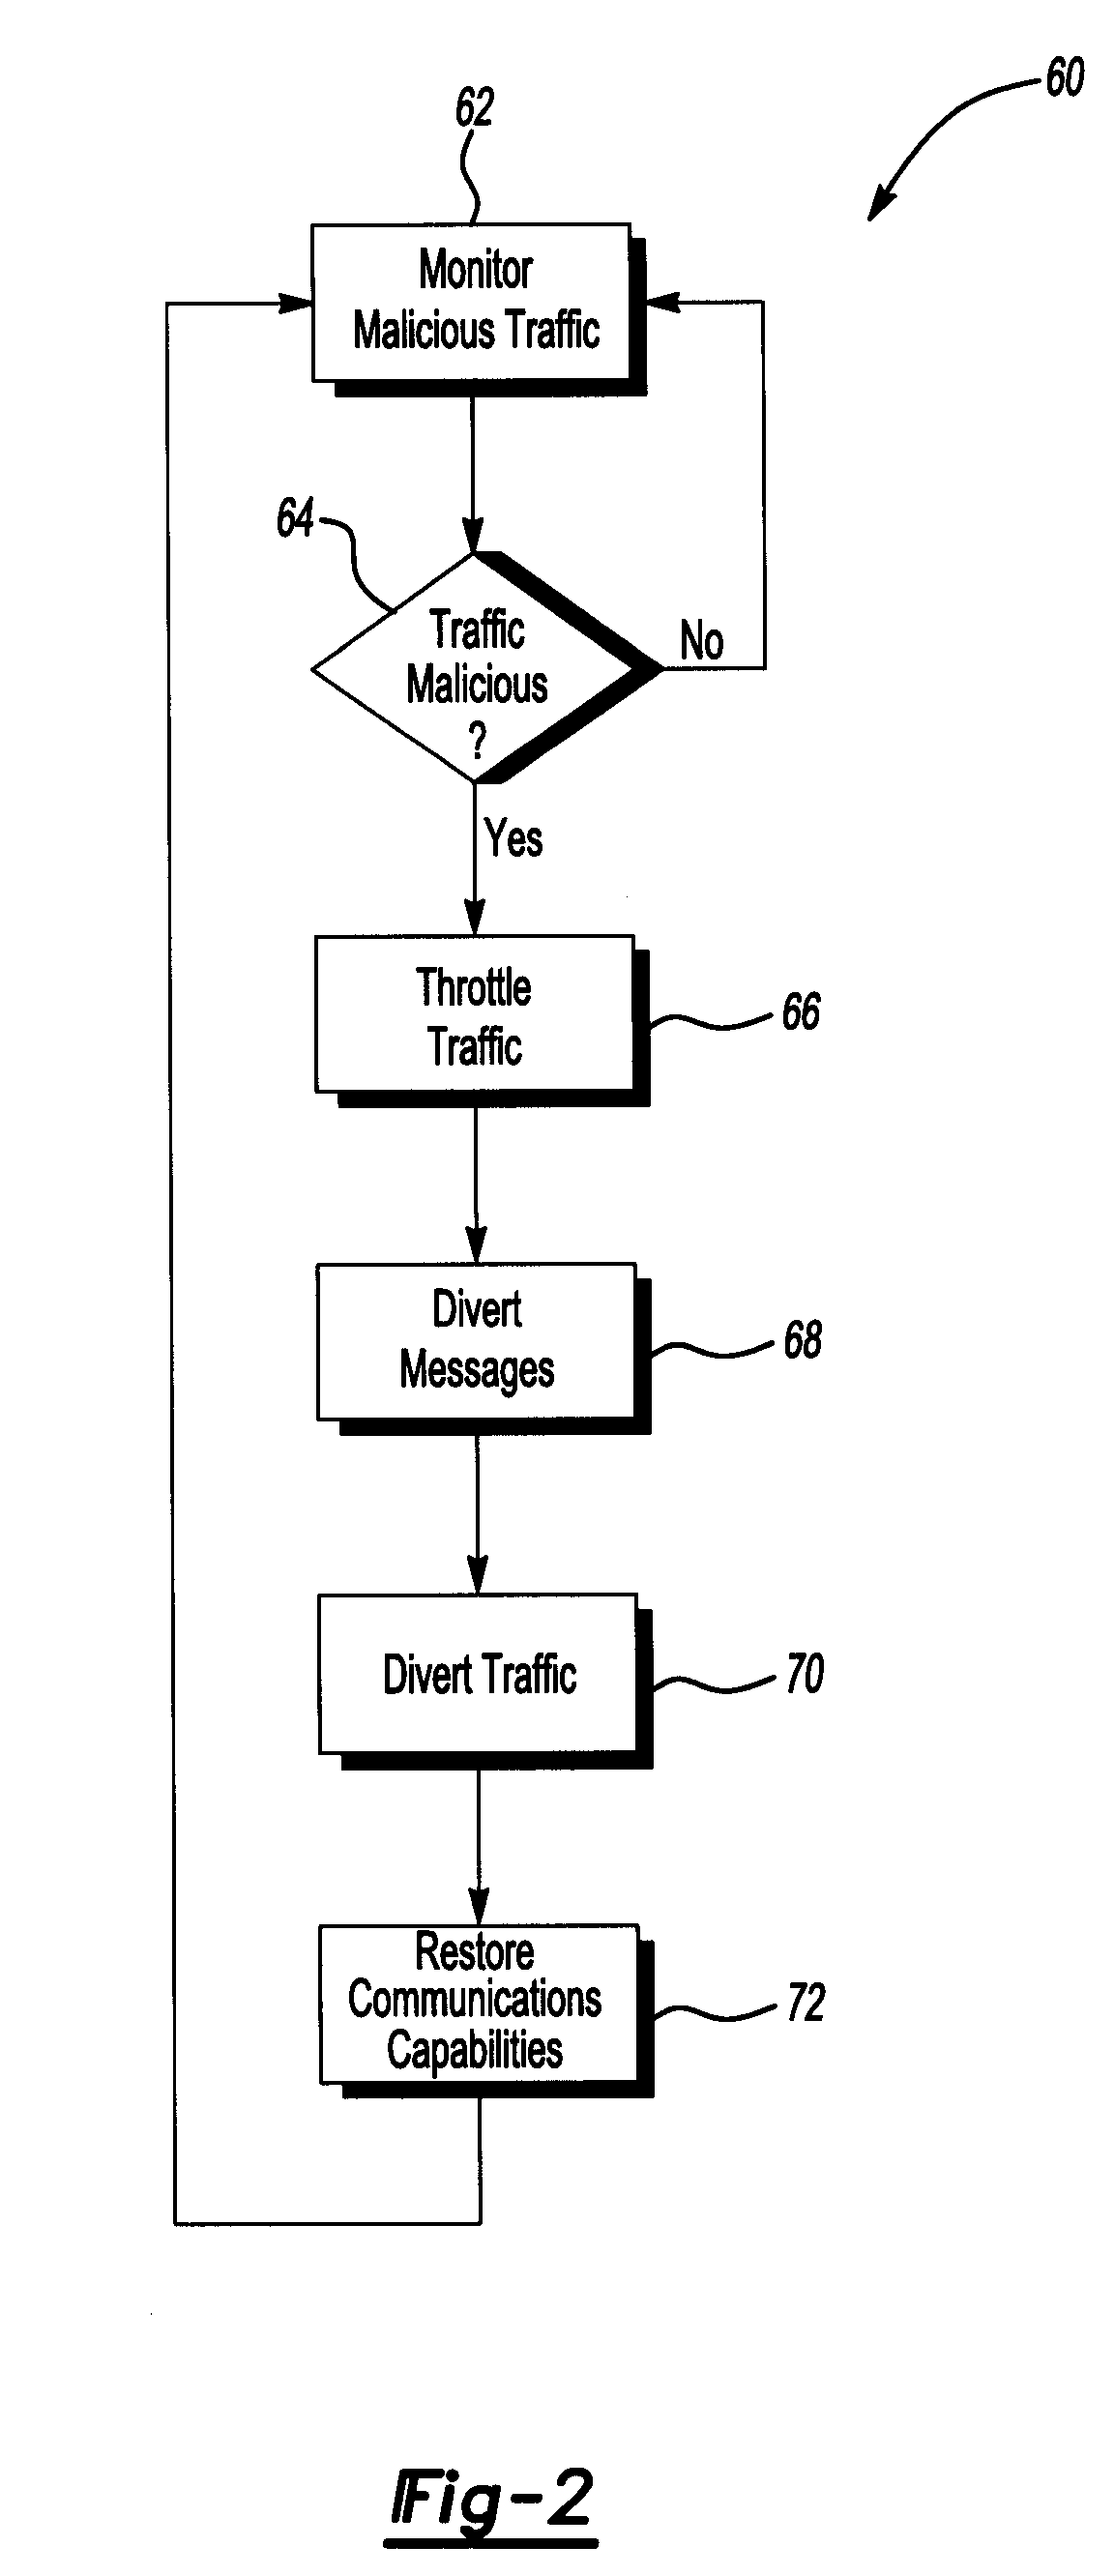 Process for abuse mitigation